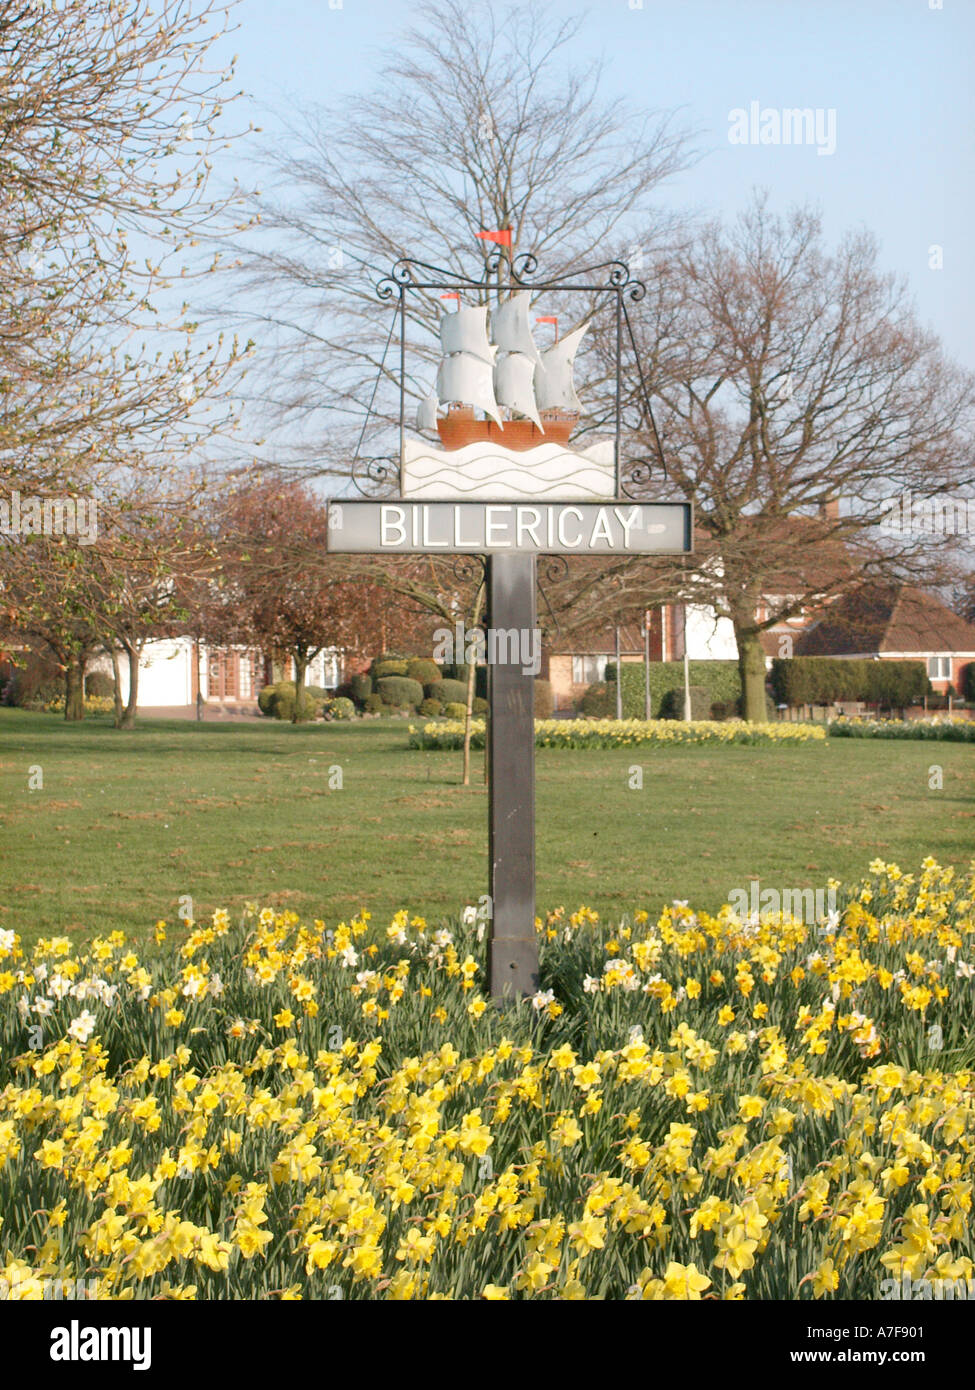 Daffodils around town sign of historical Mayflower ship which sailed in 1620 to Massachusetts some local English Pilgrims on board Billericay Essex UK Stock Photo